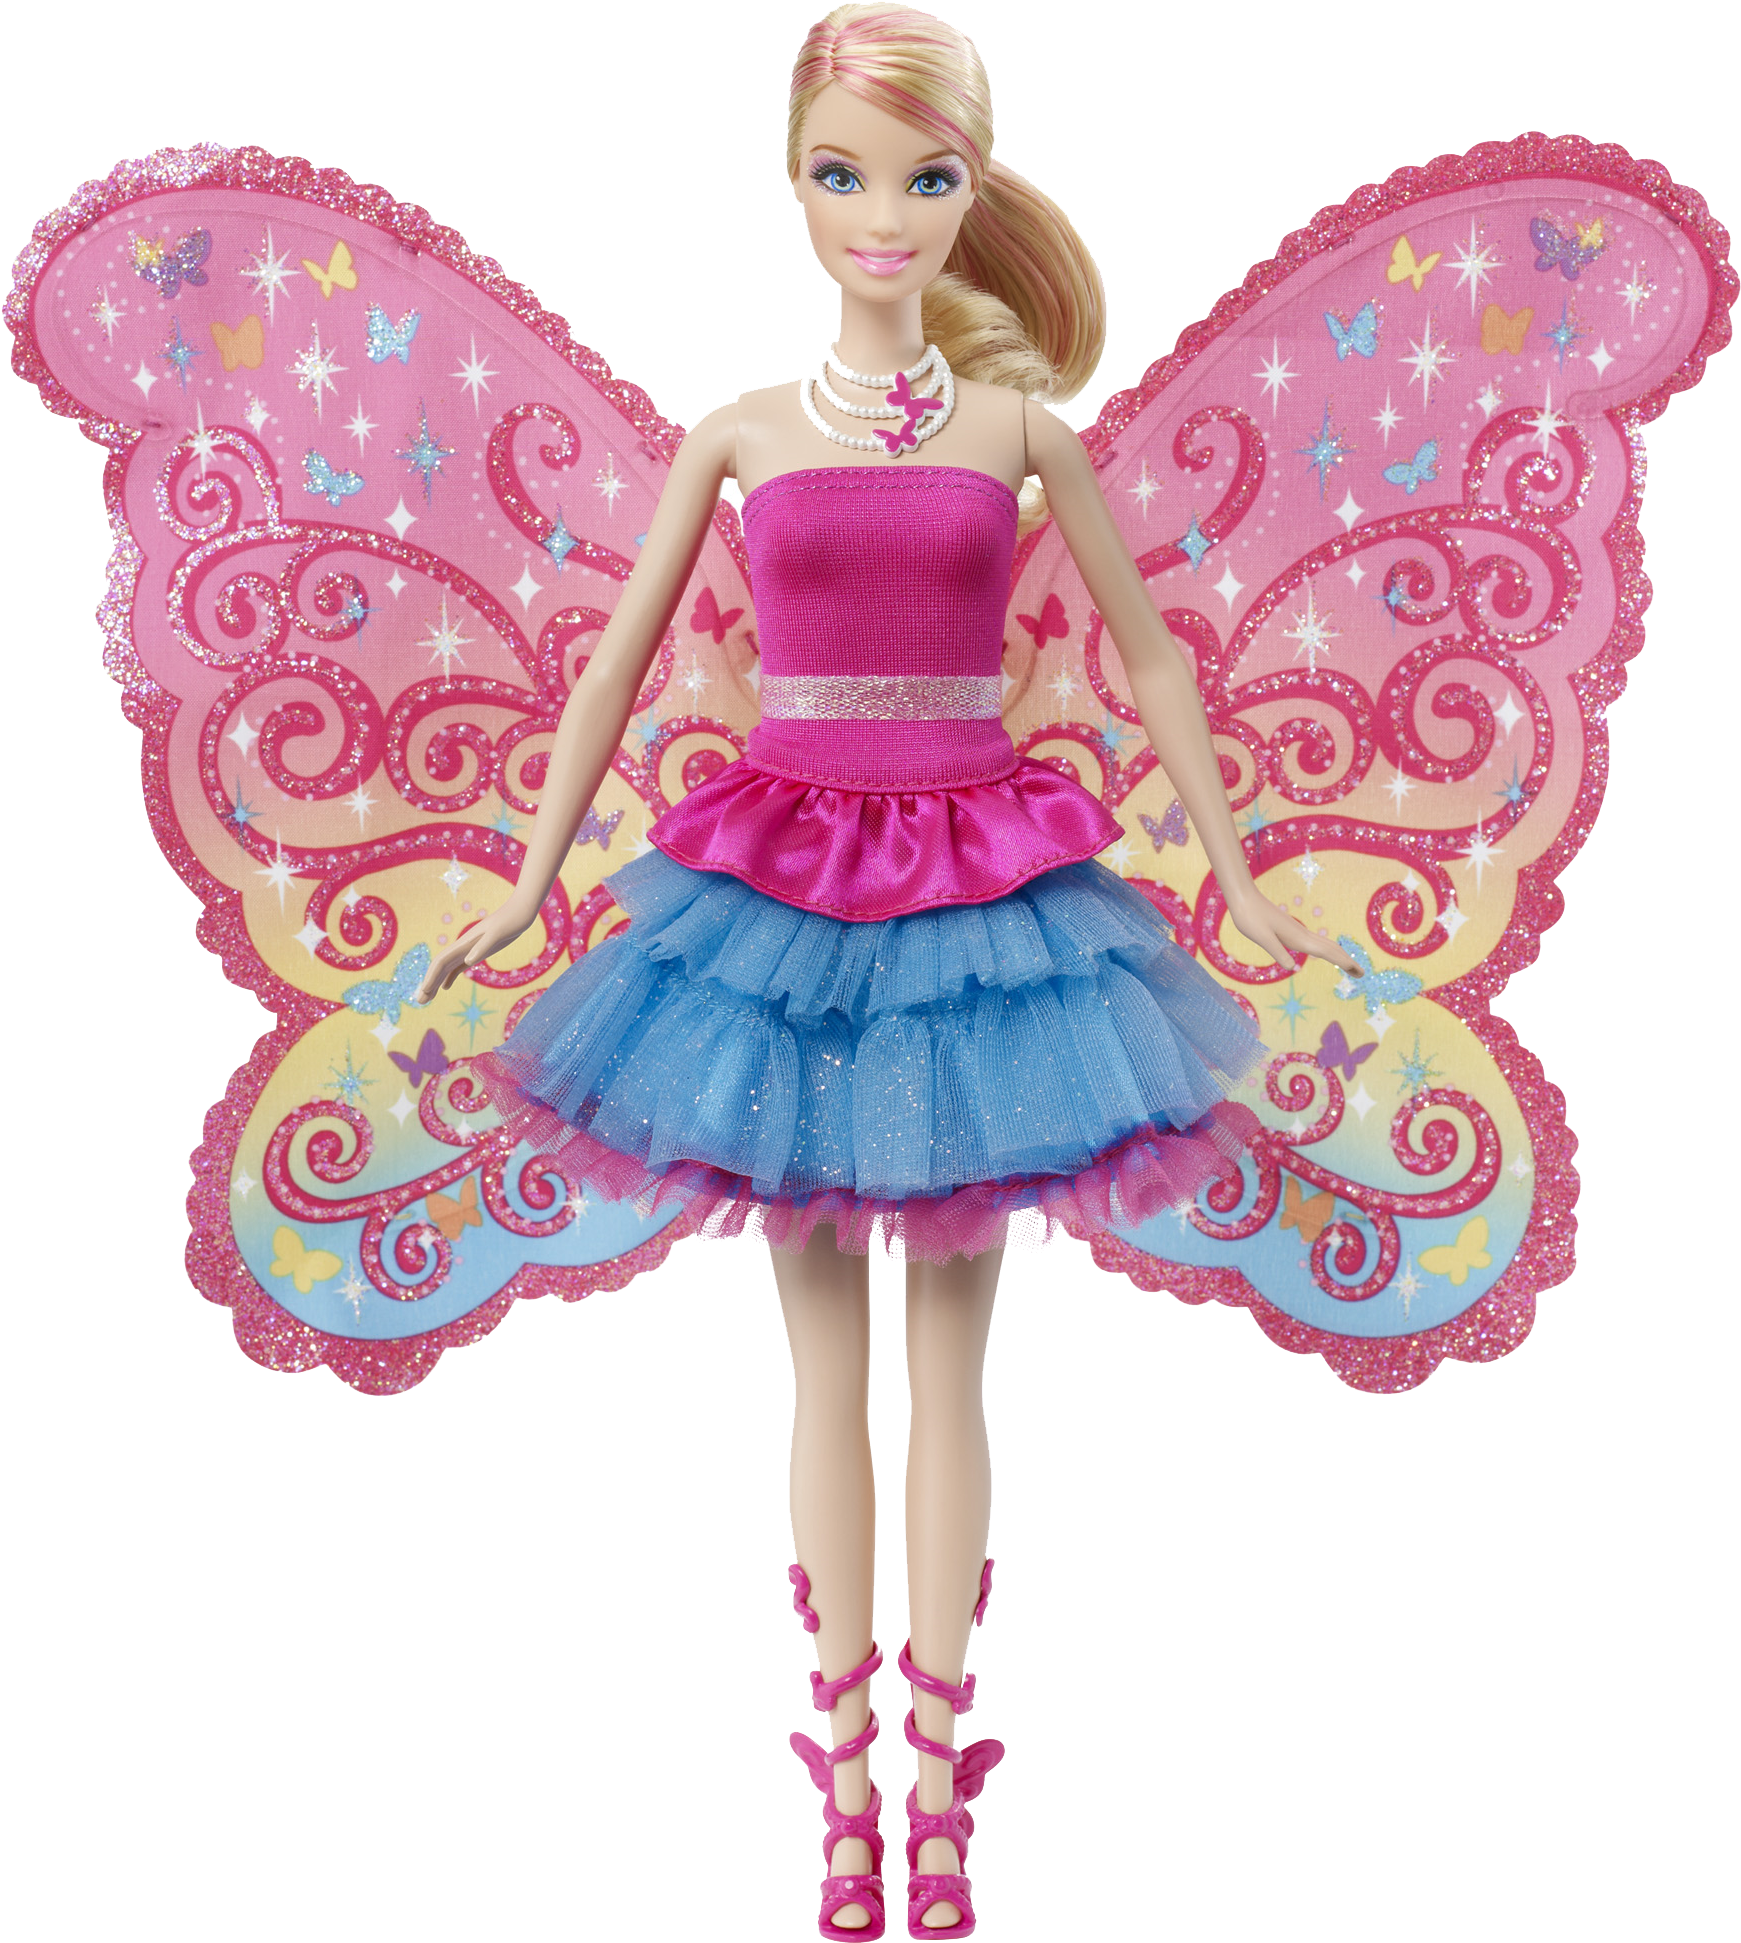 Fairy Winged Dollin Pinkand Blue Dress PNG